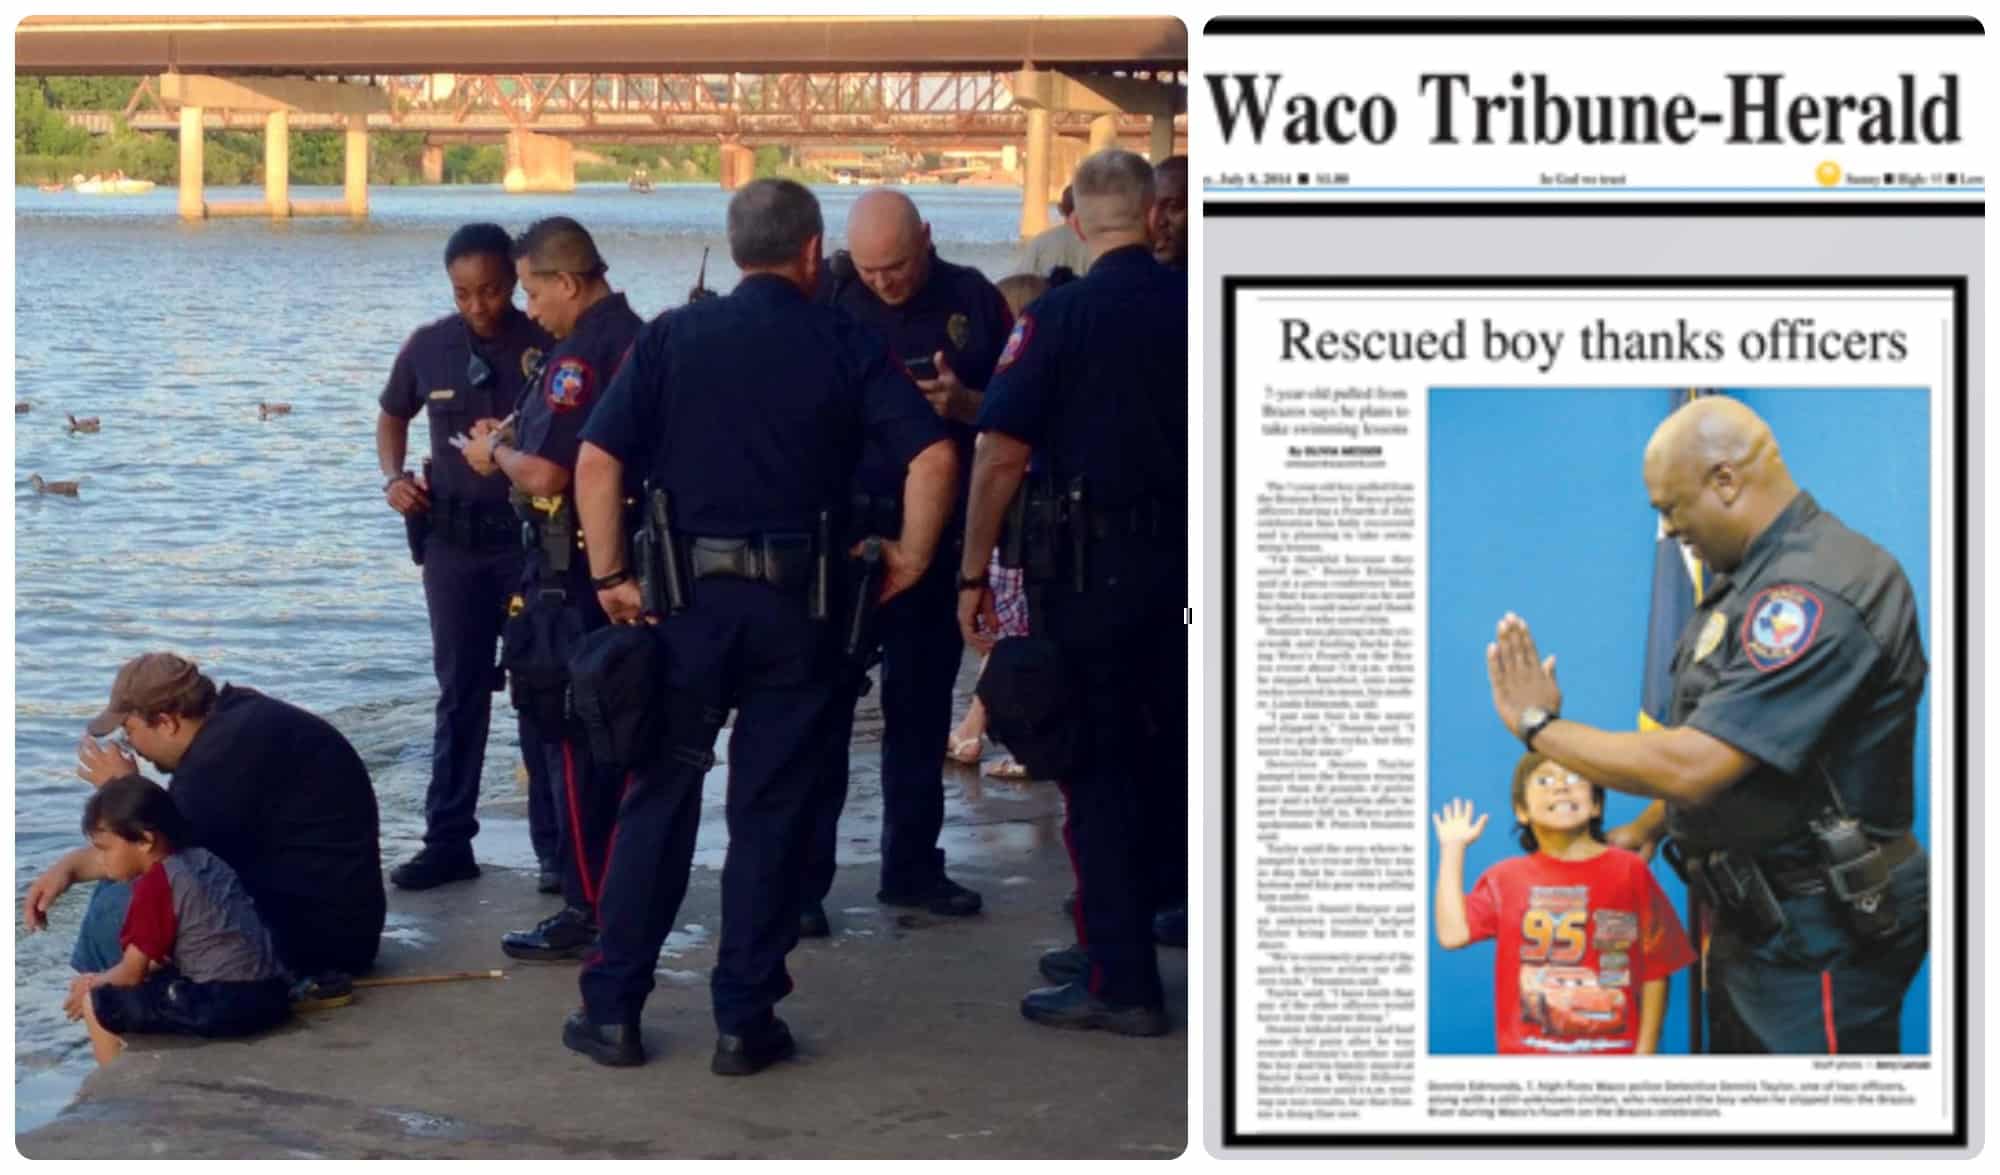 On right panel, a news article about Waco police detective Dennis Taylor rescuing a small boy; in the left panel, a photograph of a group of police offers with the rescued boy